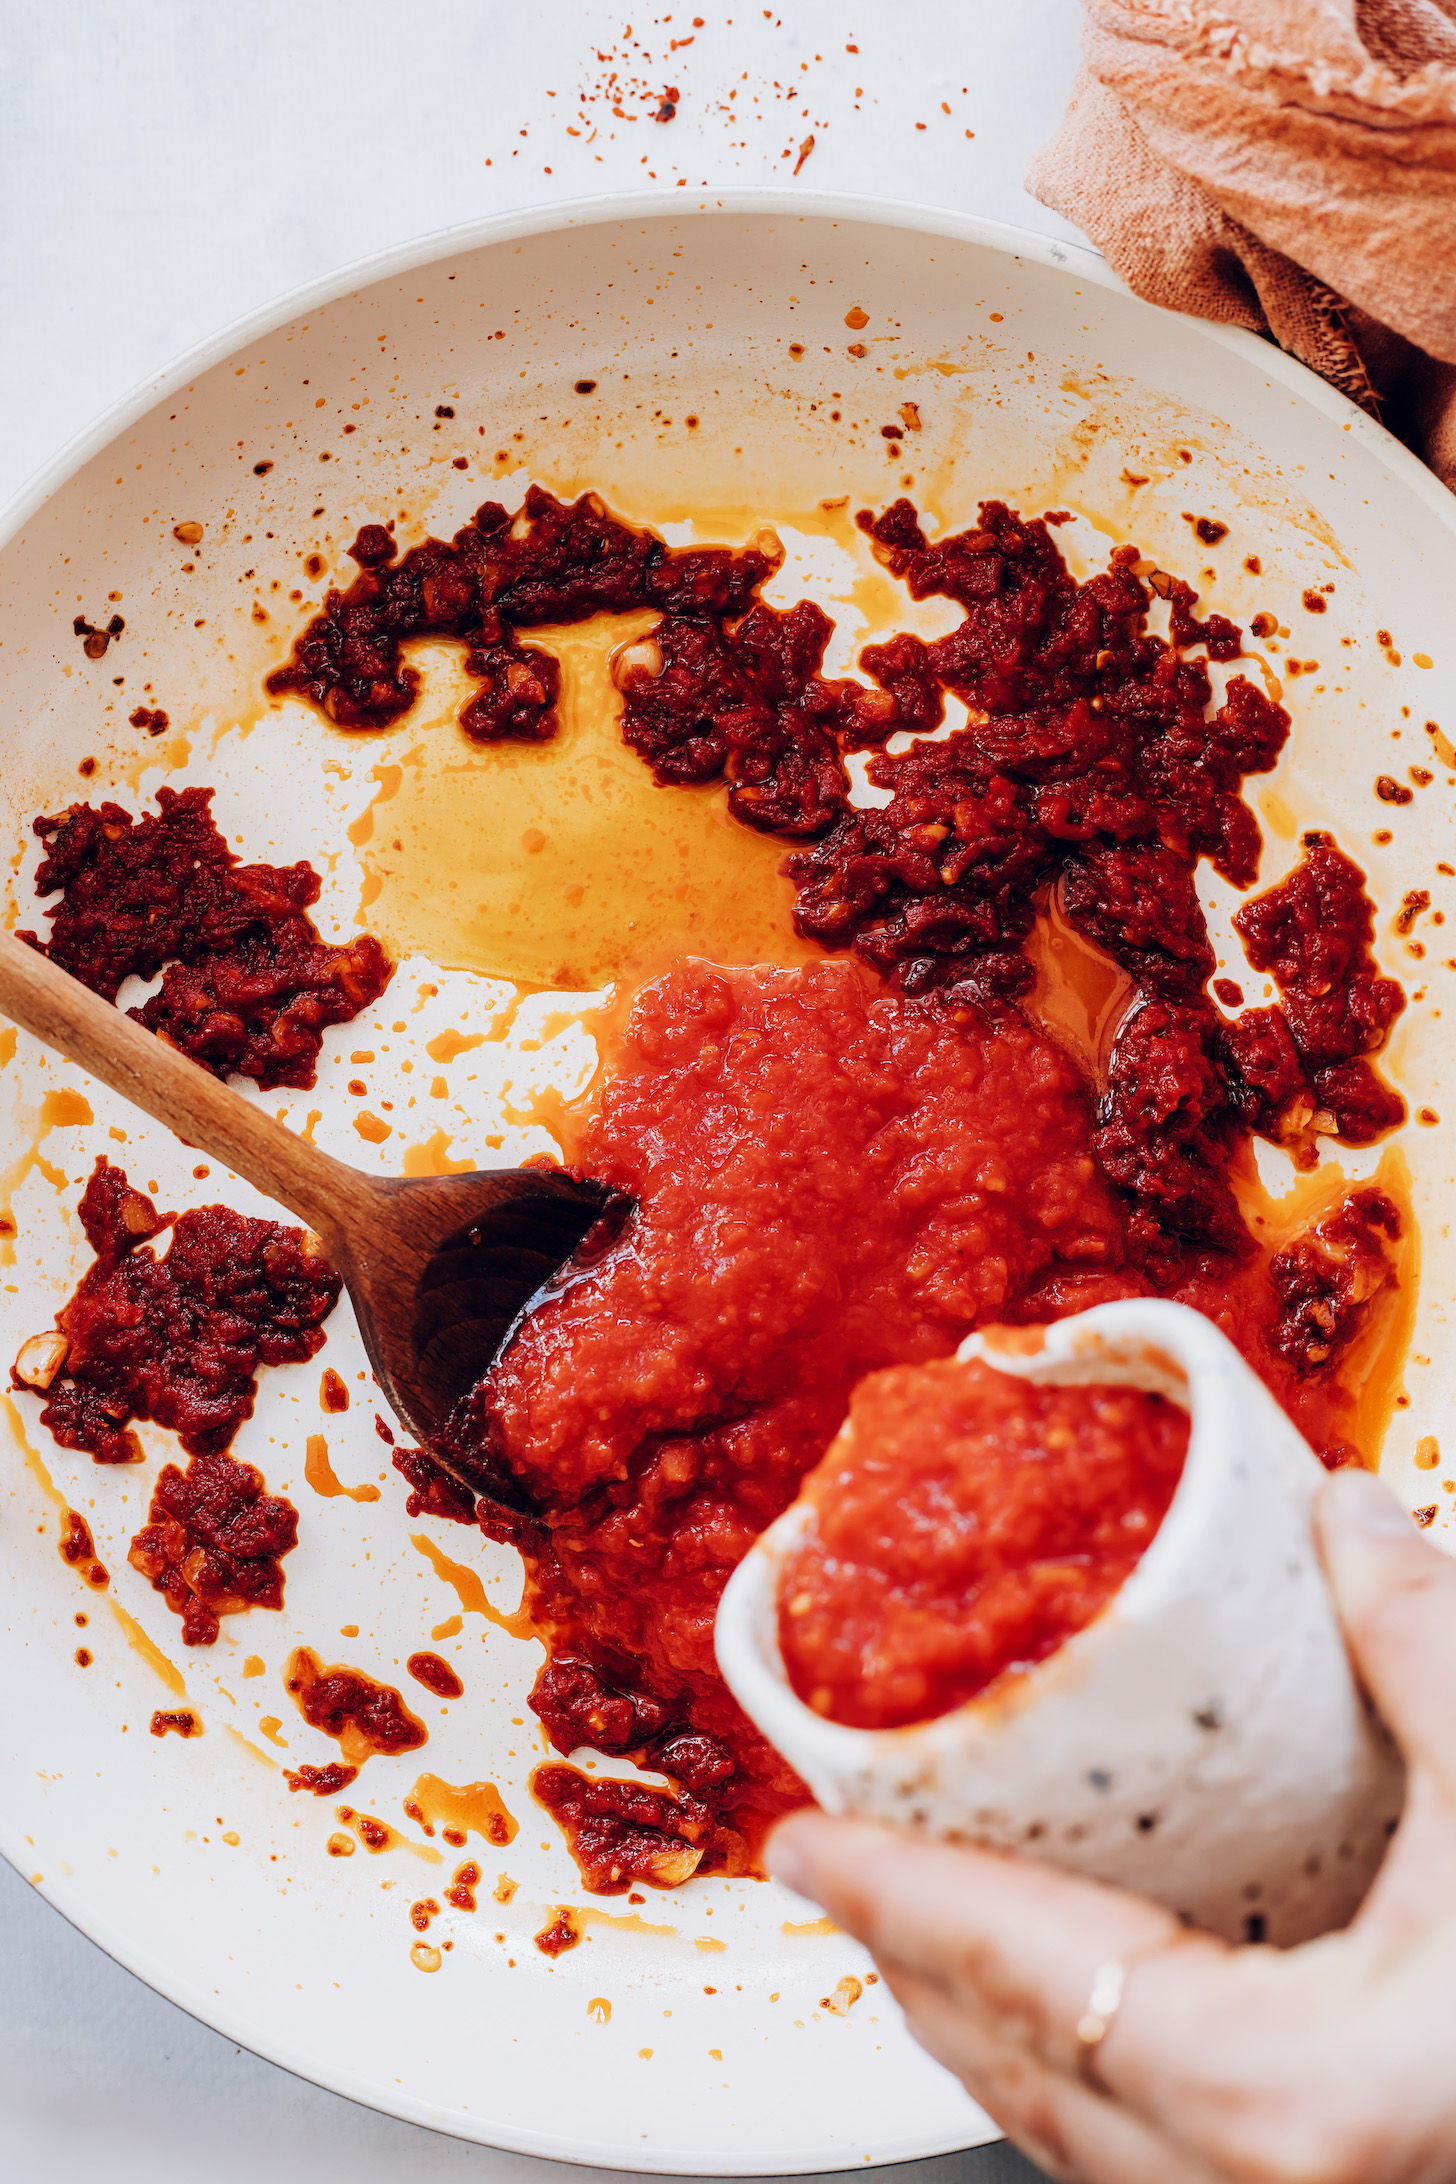 Pouring crushed tomatoes into a skillet of sautéed red pepper flakes, garlic, and tomato paste